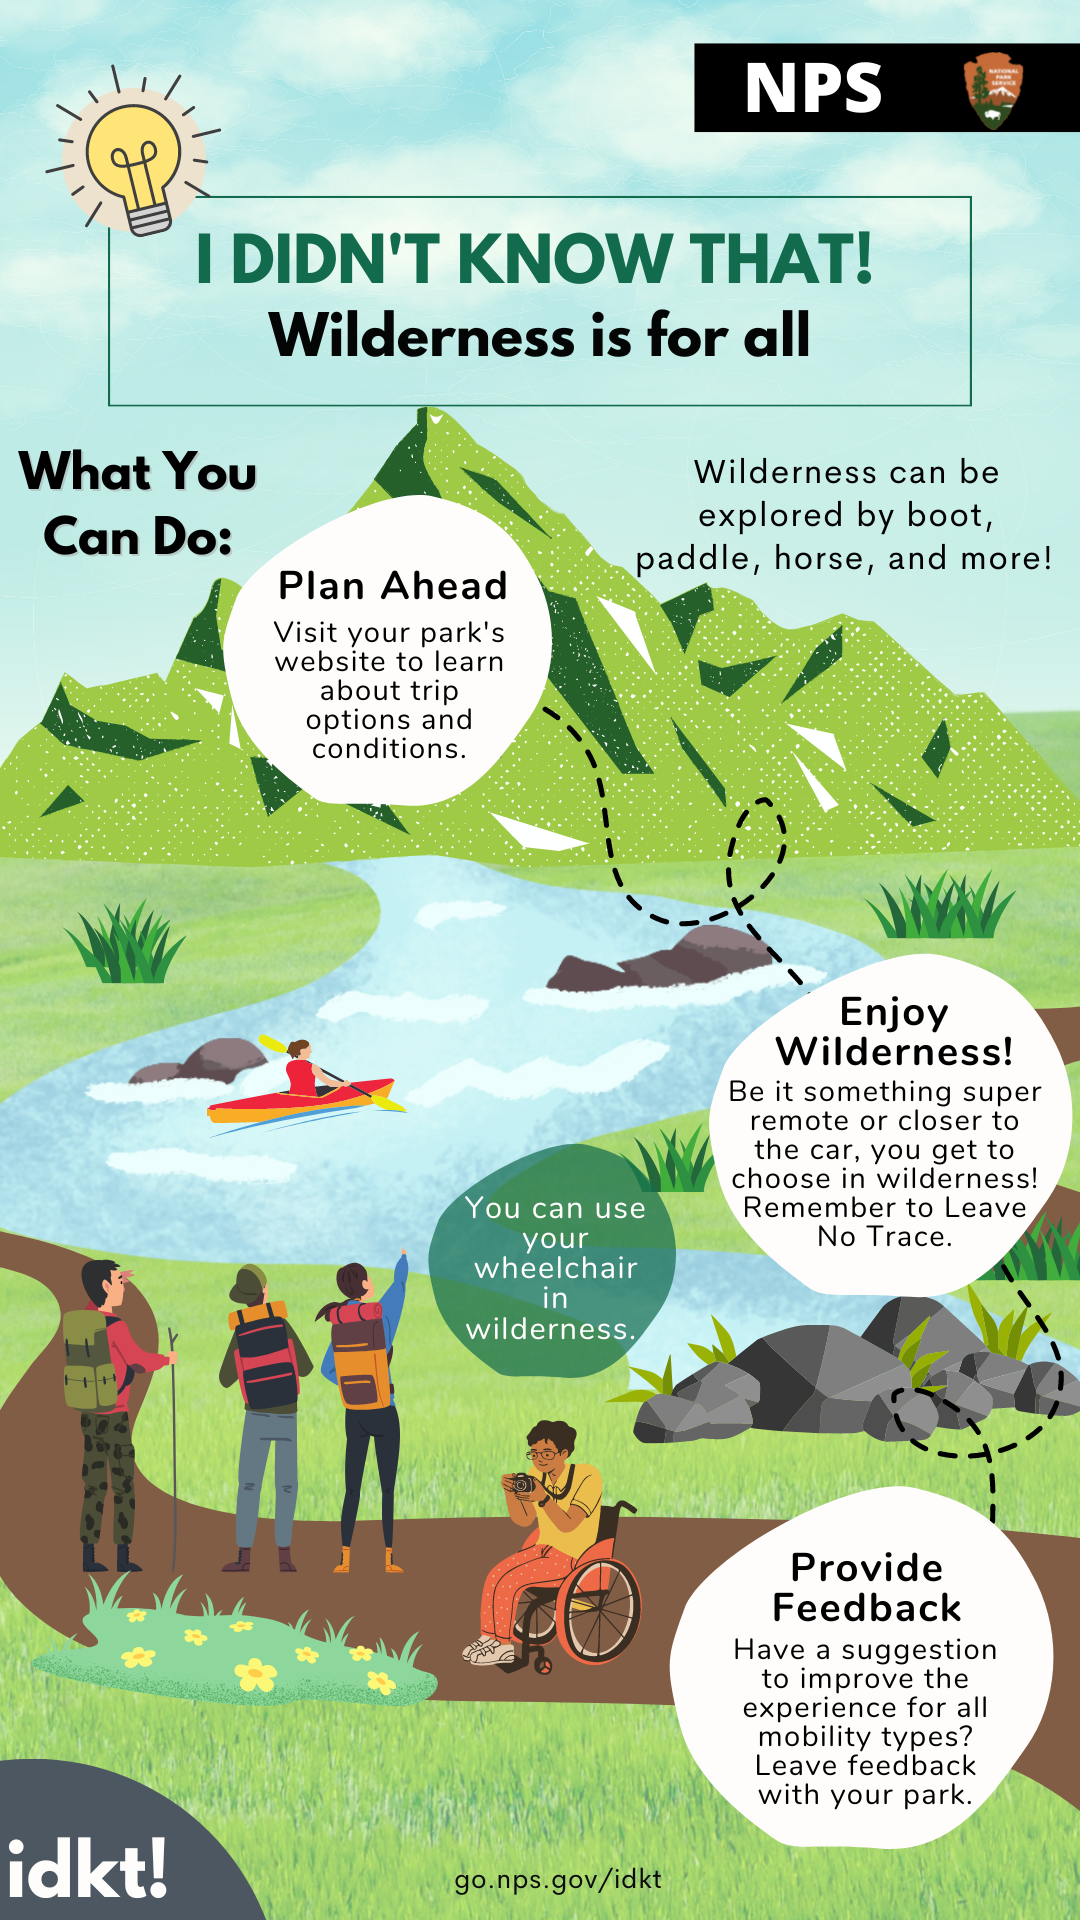 I Didn't Know That!: Wilderness is for All (U.S. National Park Service)